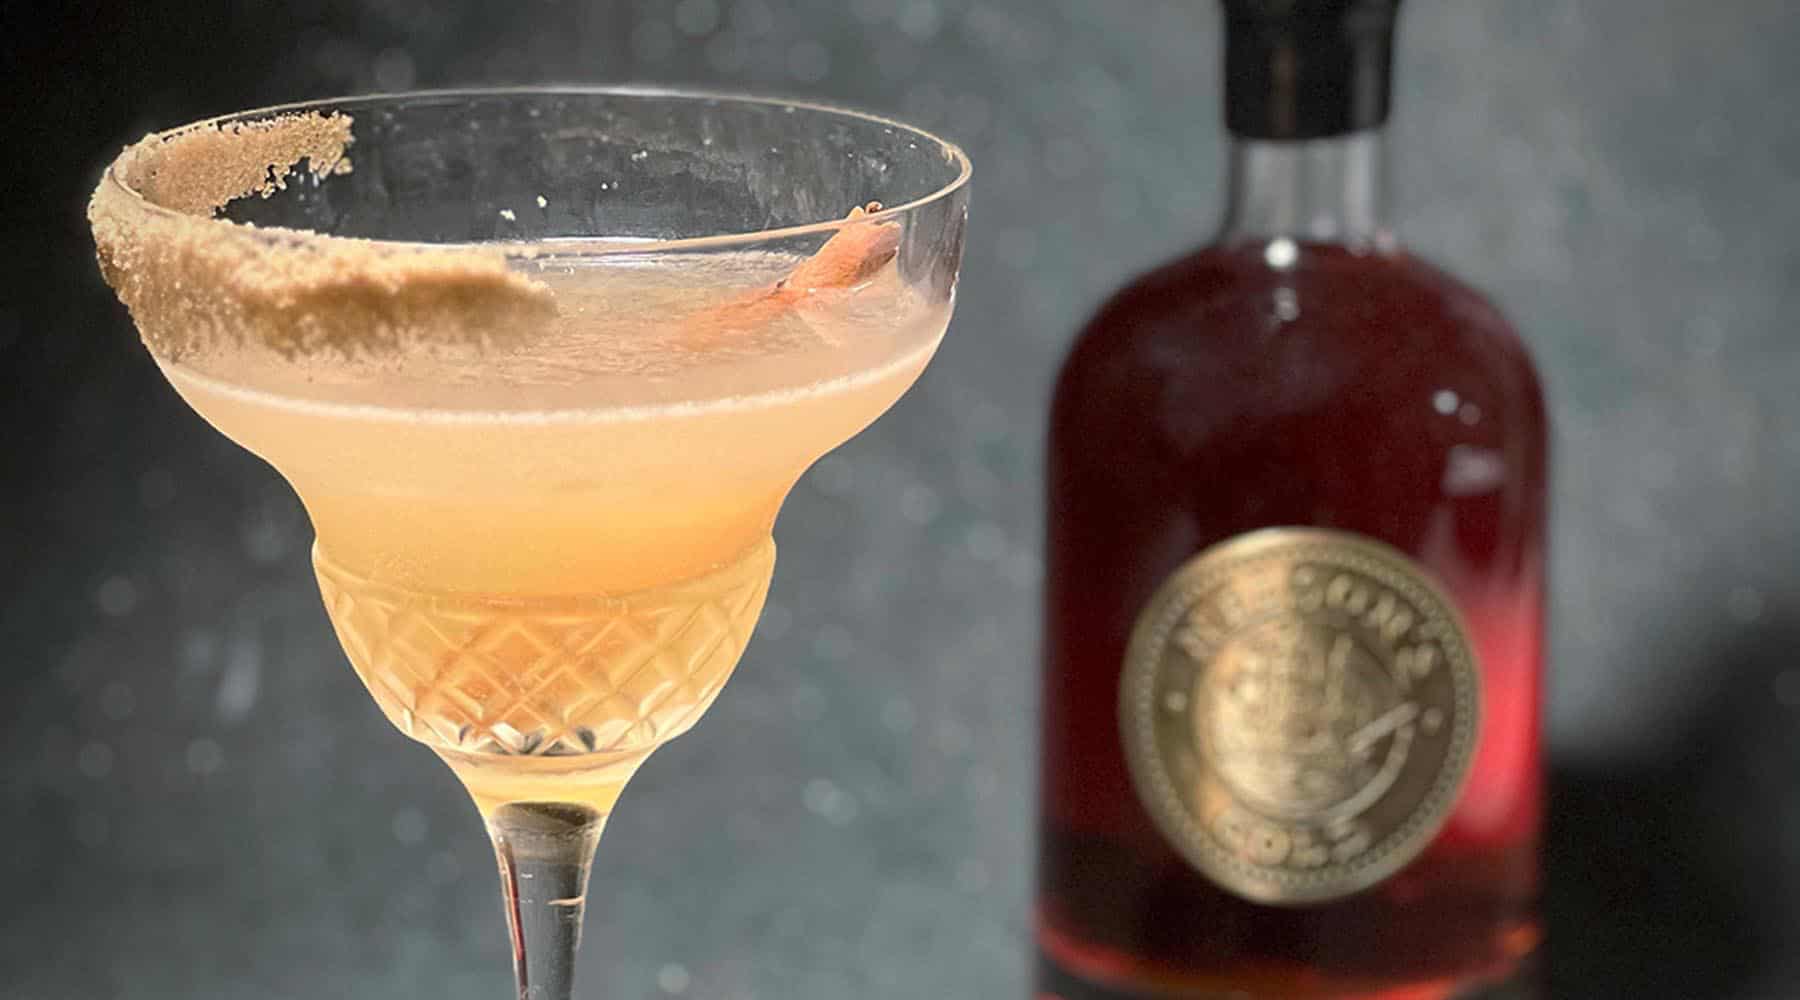 Nelson's Gold® - Spiced Apple and Caramel Margarita